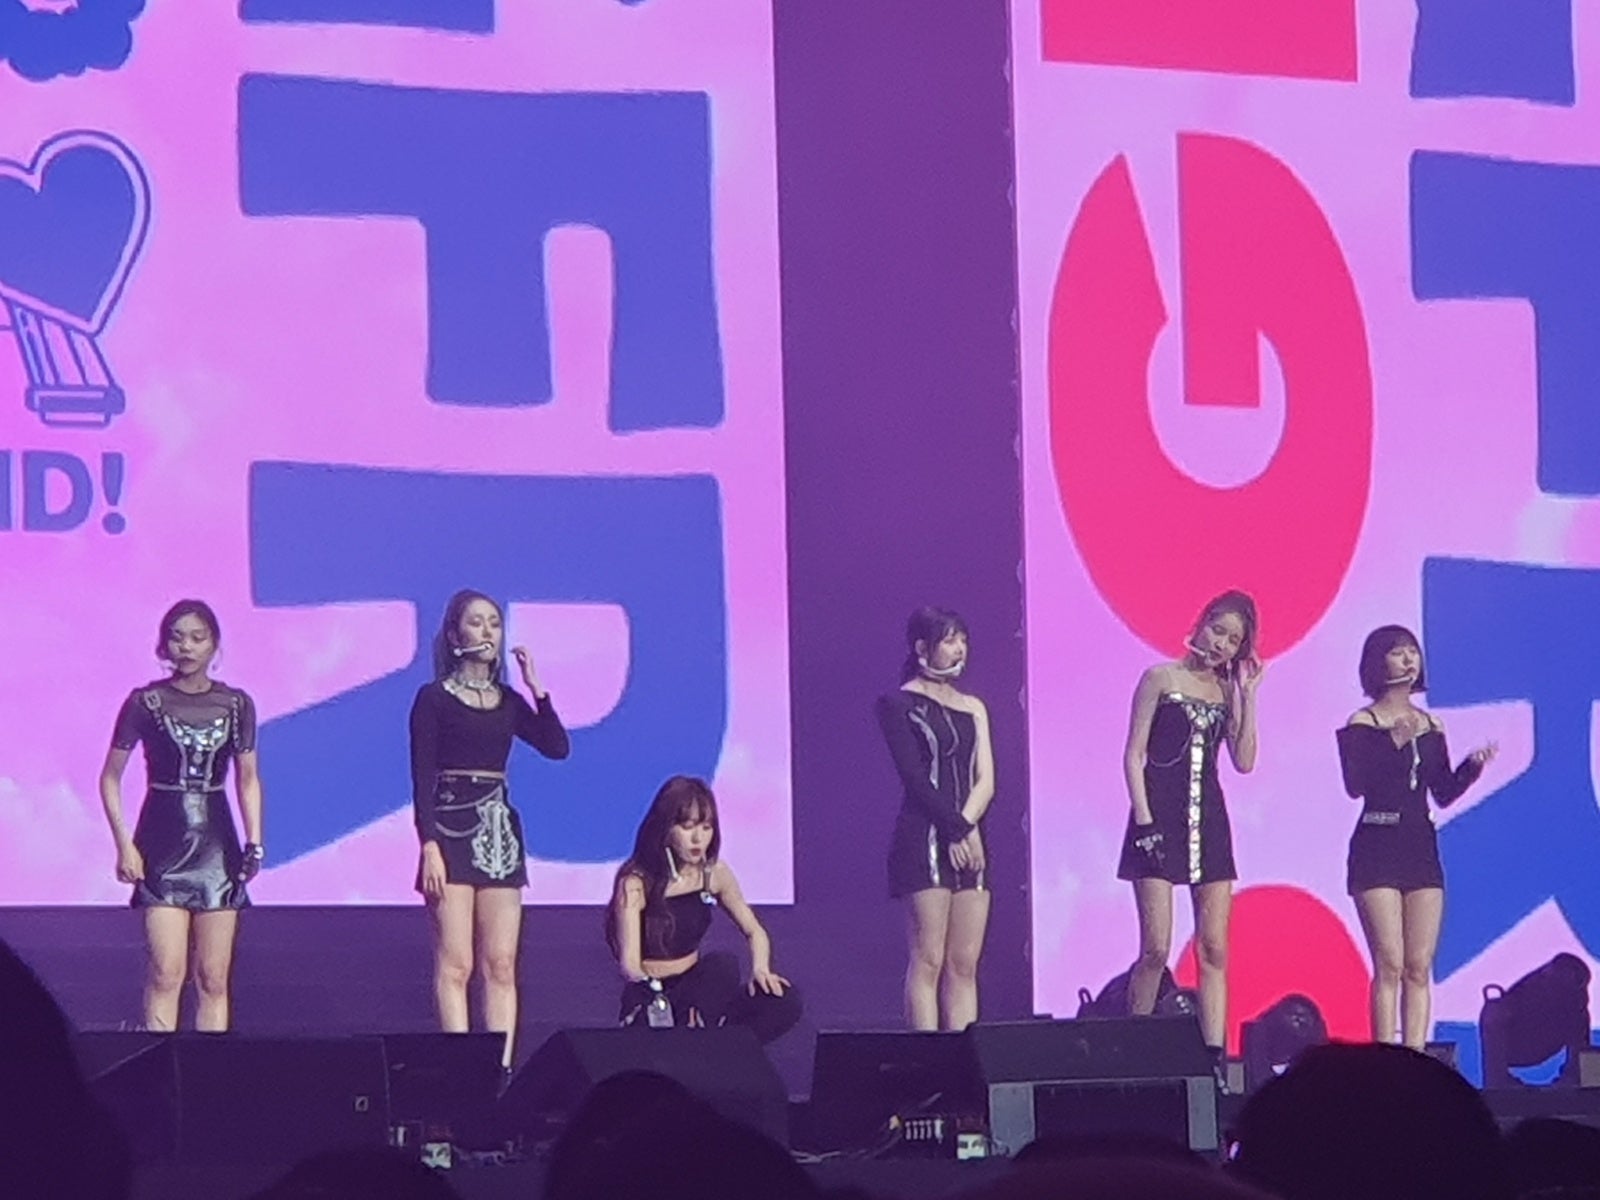 &Quot;Baby Sayang, Saya Suka Kamu,&Quot; Gfriend Wows Malaysian Fans With Bm Phrases During Their Concert - World Of Buzz 4